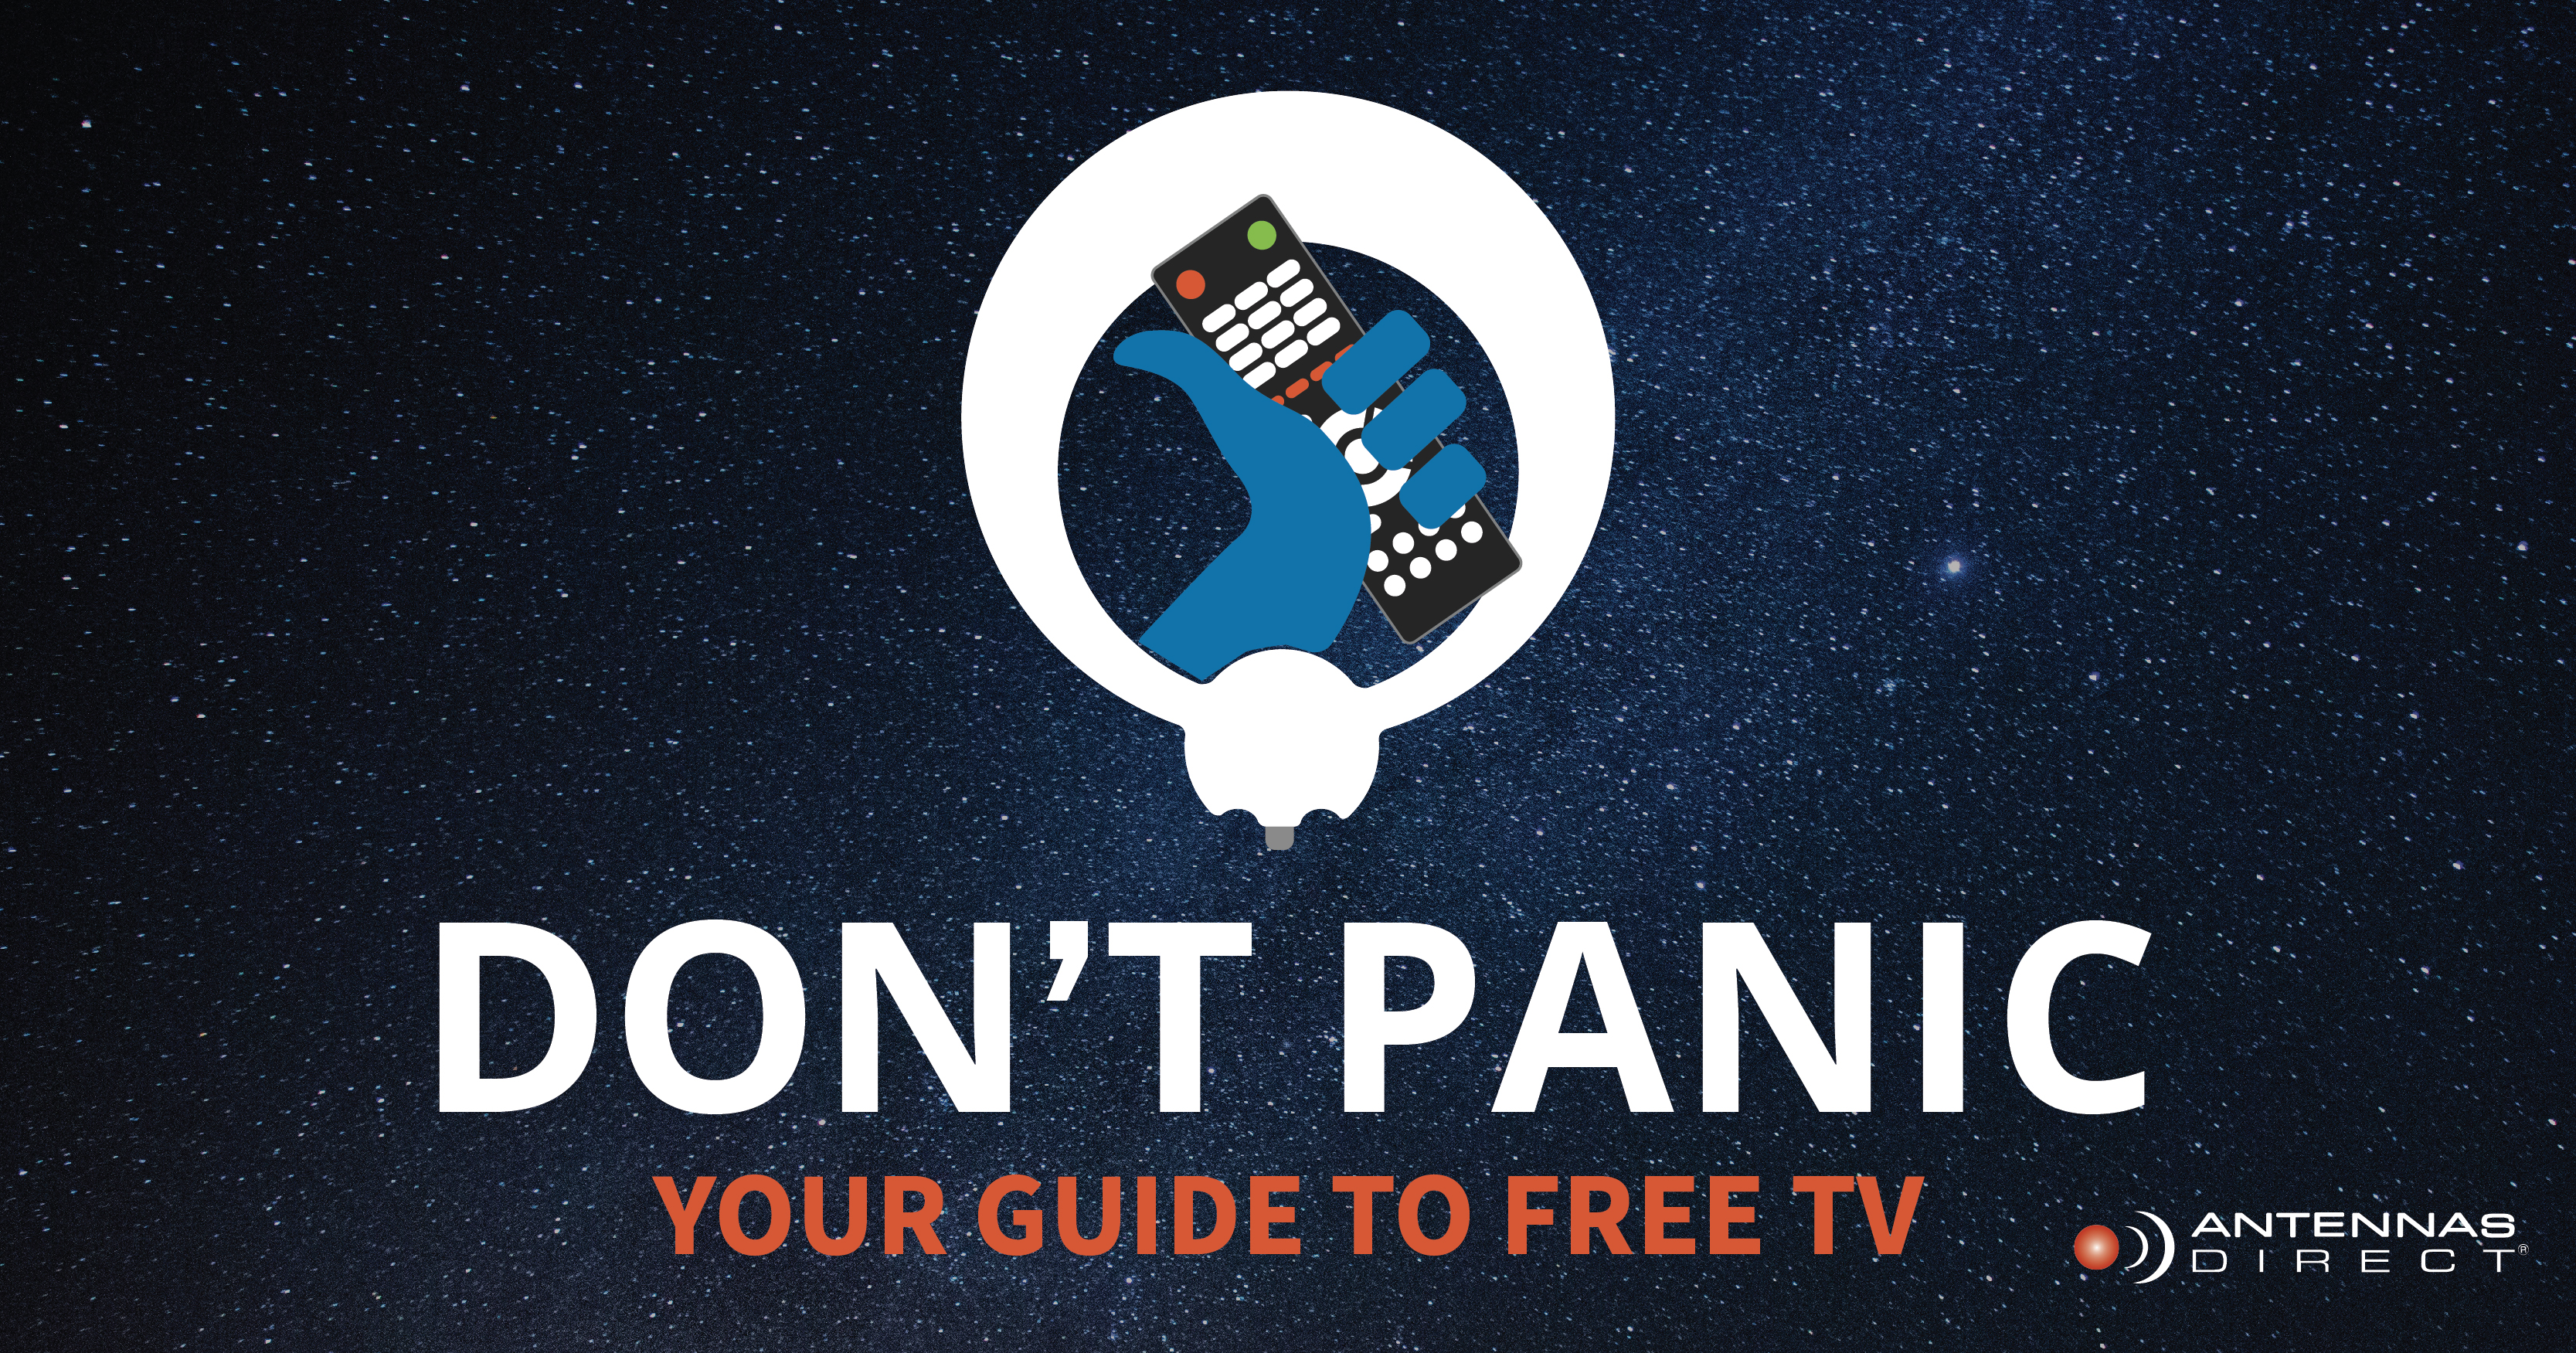 Results image of Don't panic your guide to free tv